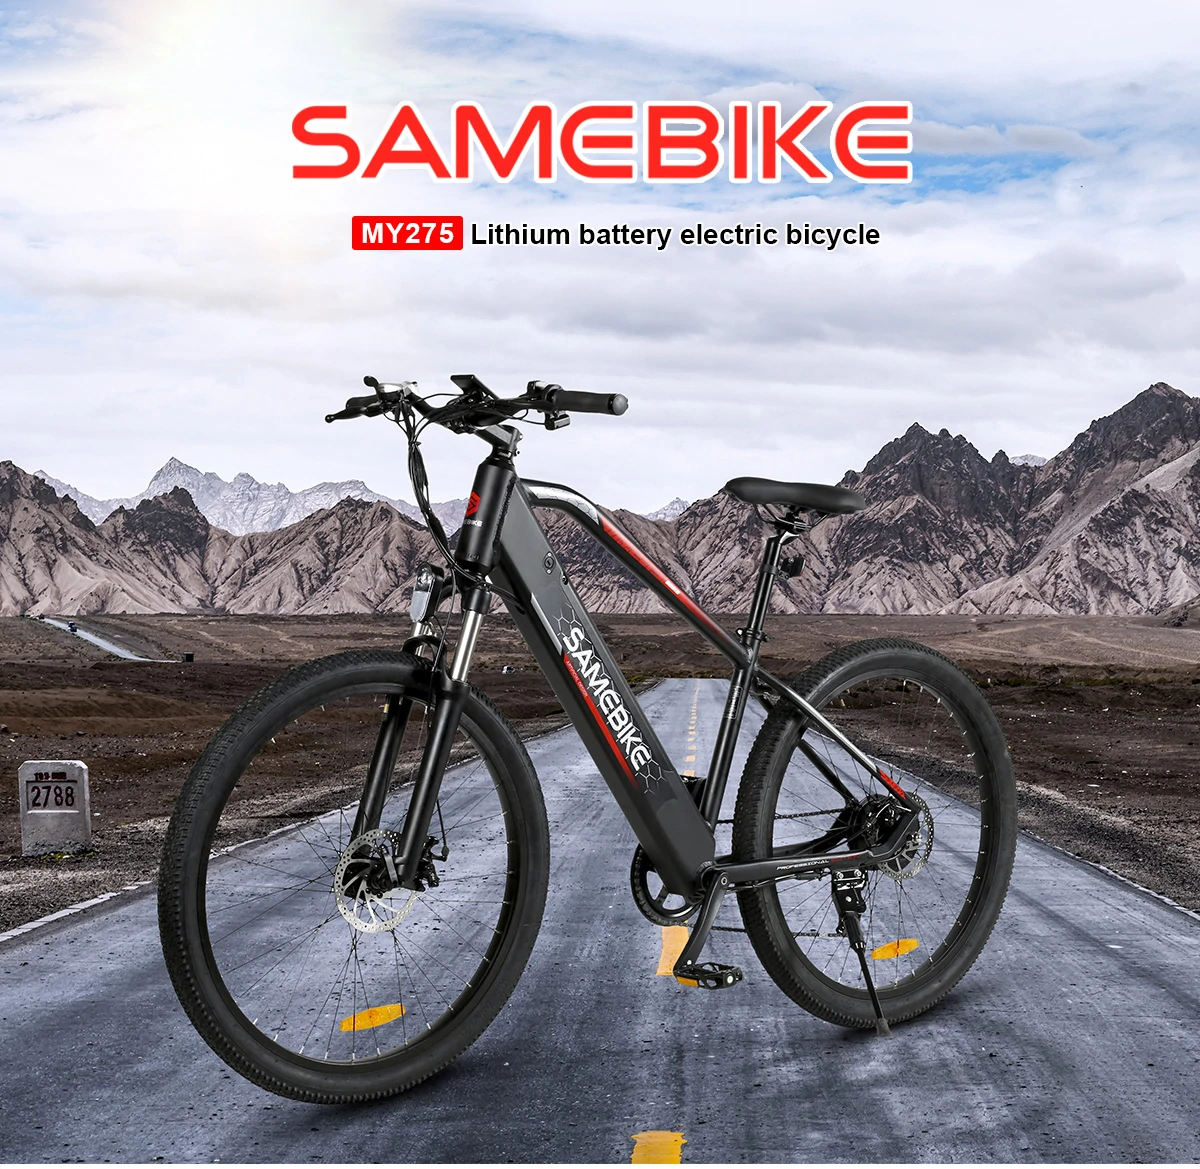 SAMEBIKE MY275-FT – New electric bike with convincing capabilities